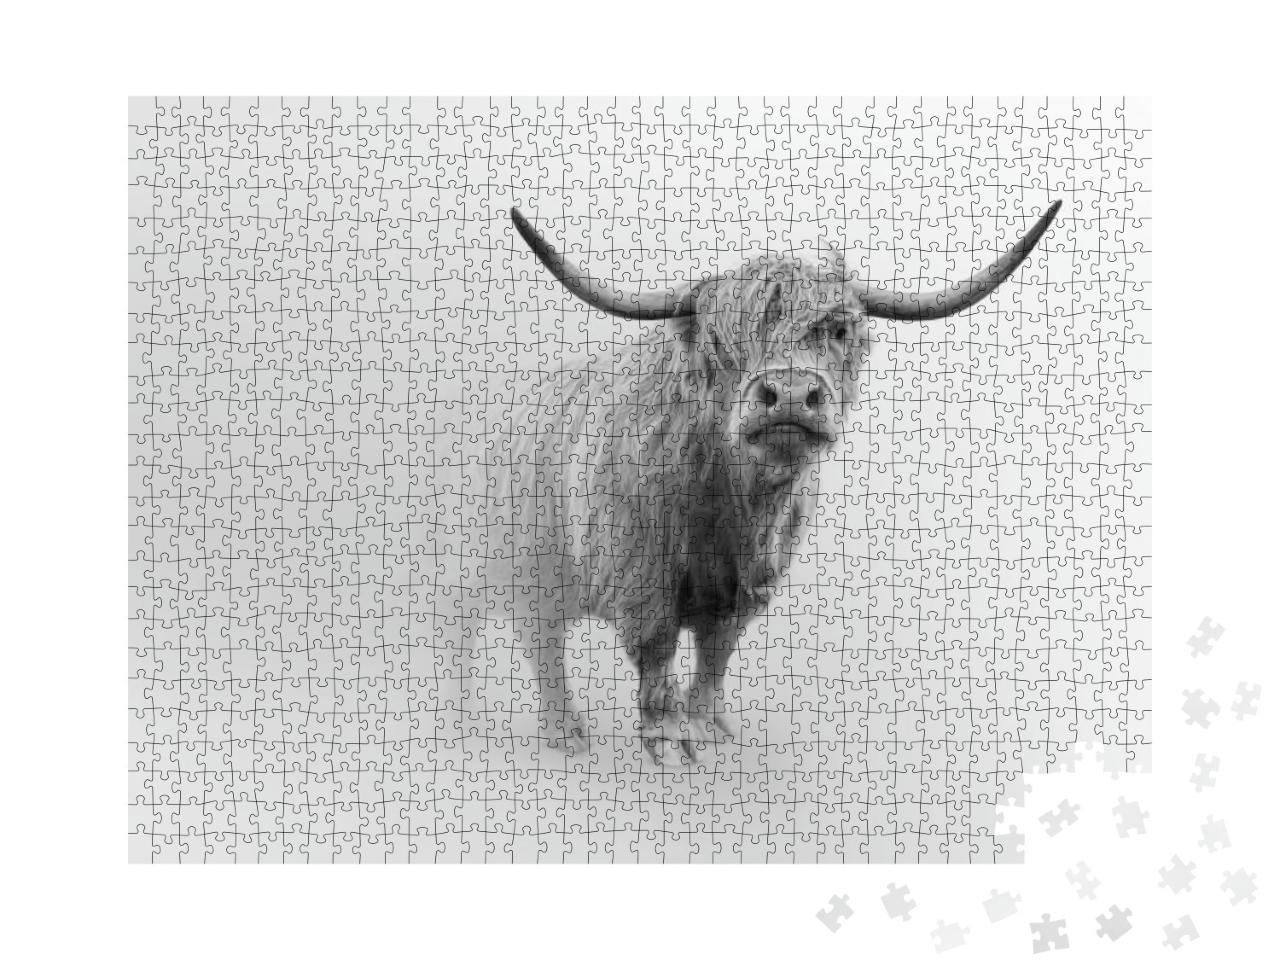 Scottish Highlands Cattle Wild Cow Farm Animal... Jigsaw Puzzle with 1000 pieces